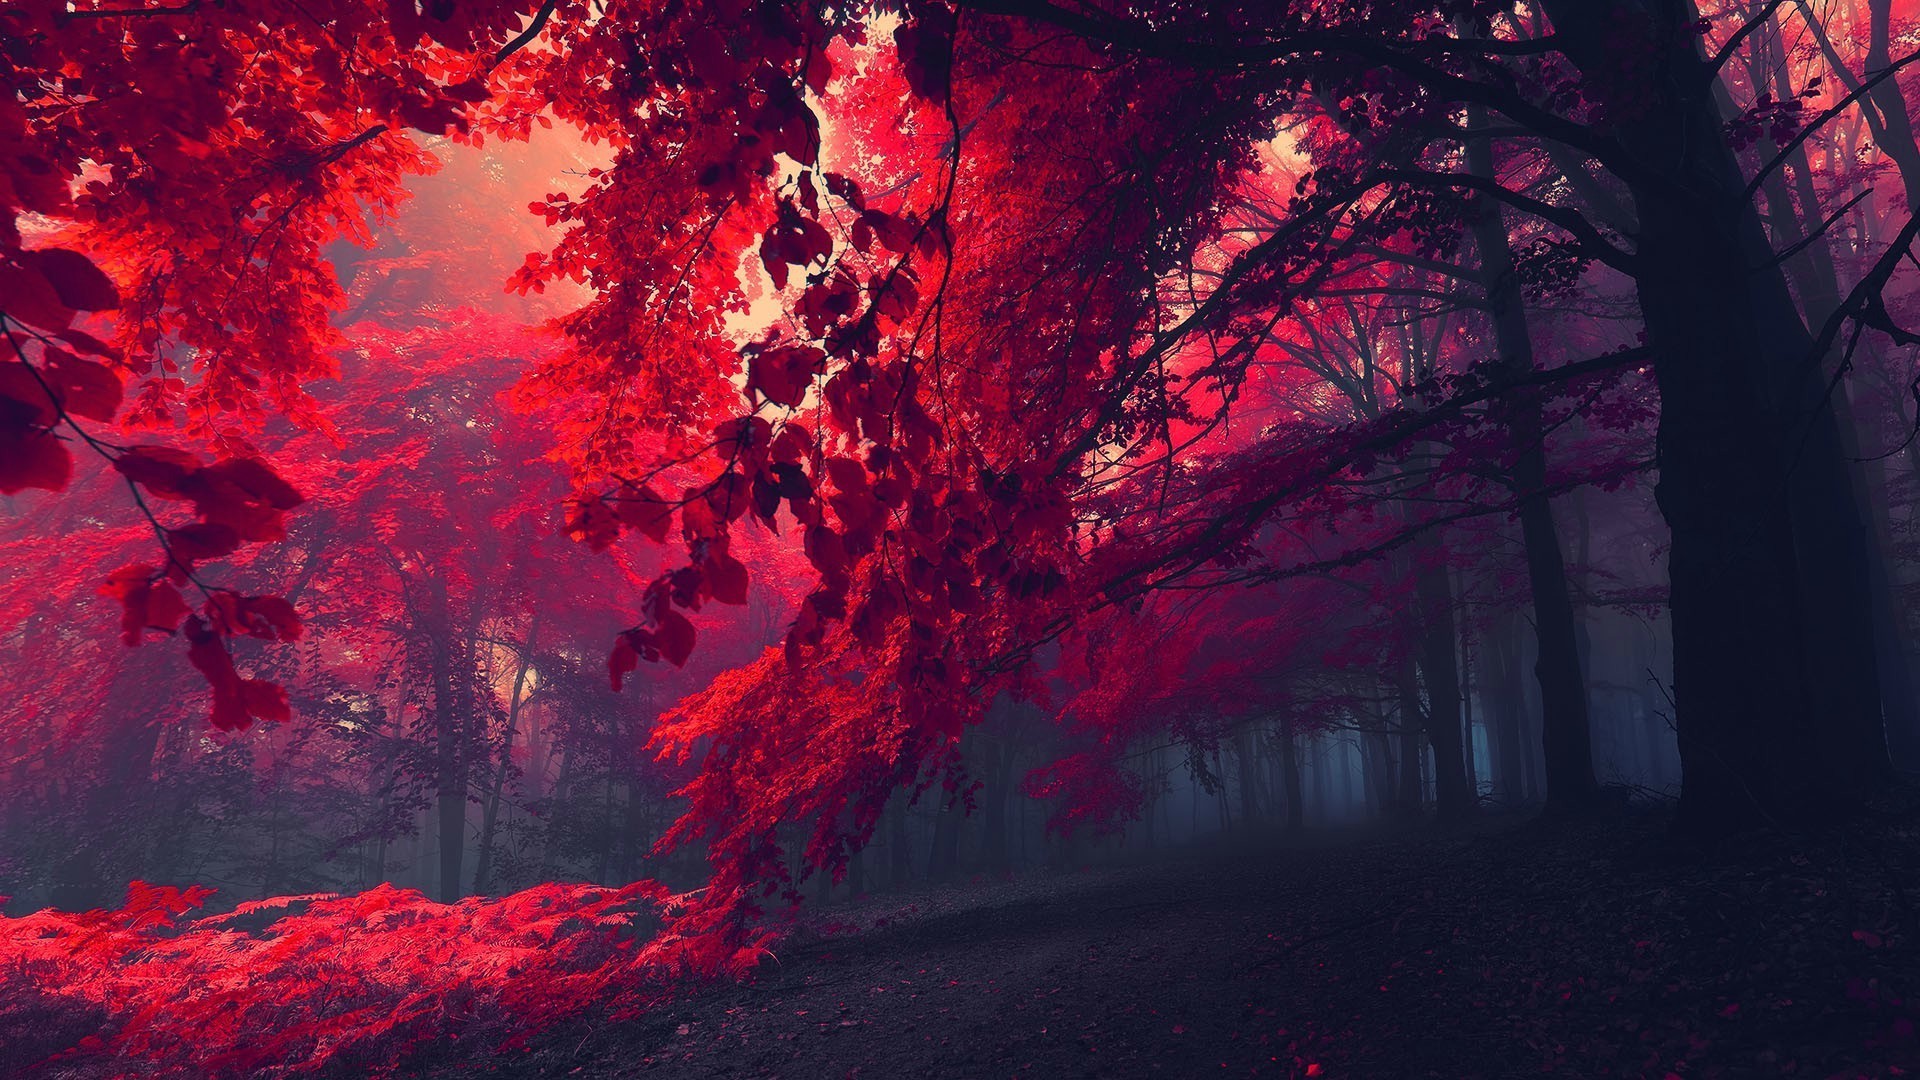 Red nature wallpaper pictures